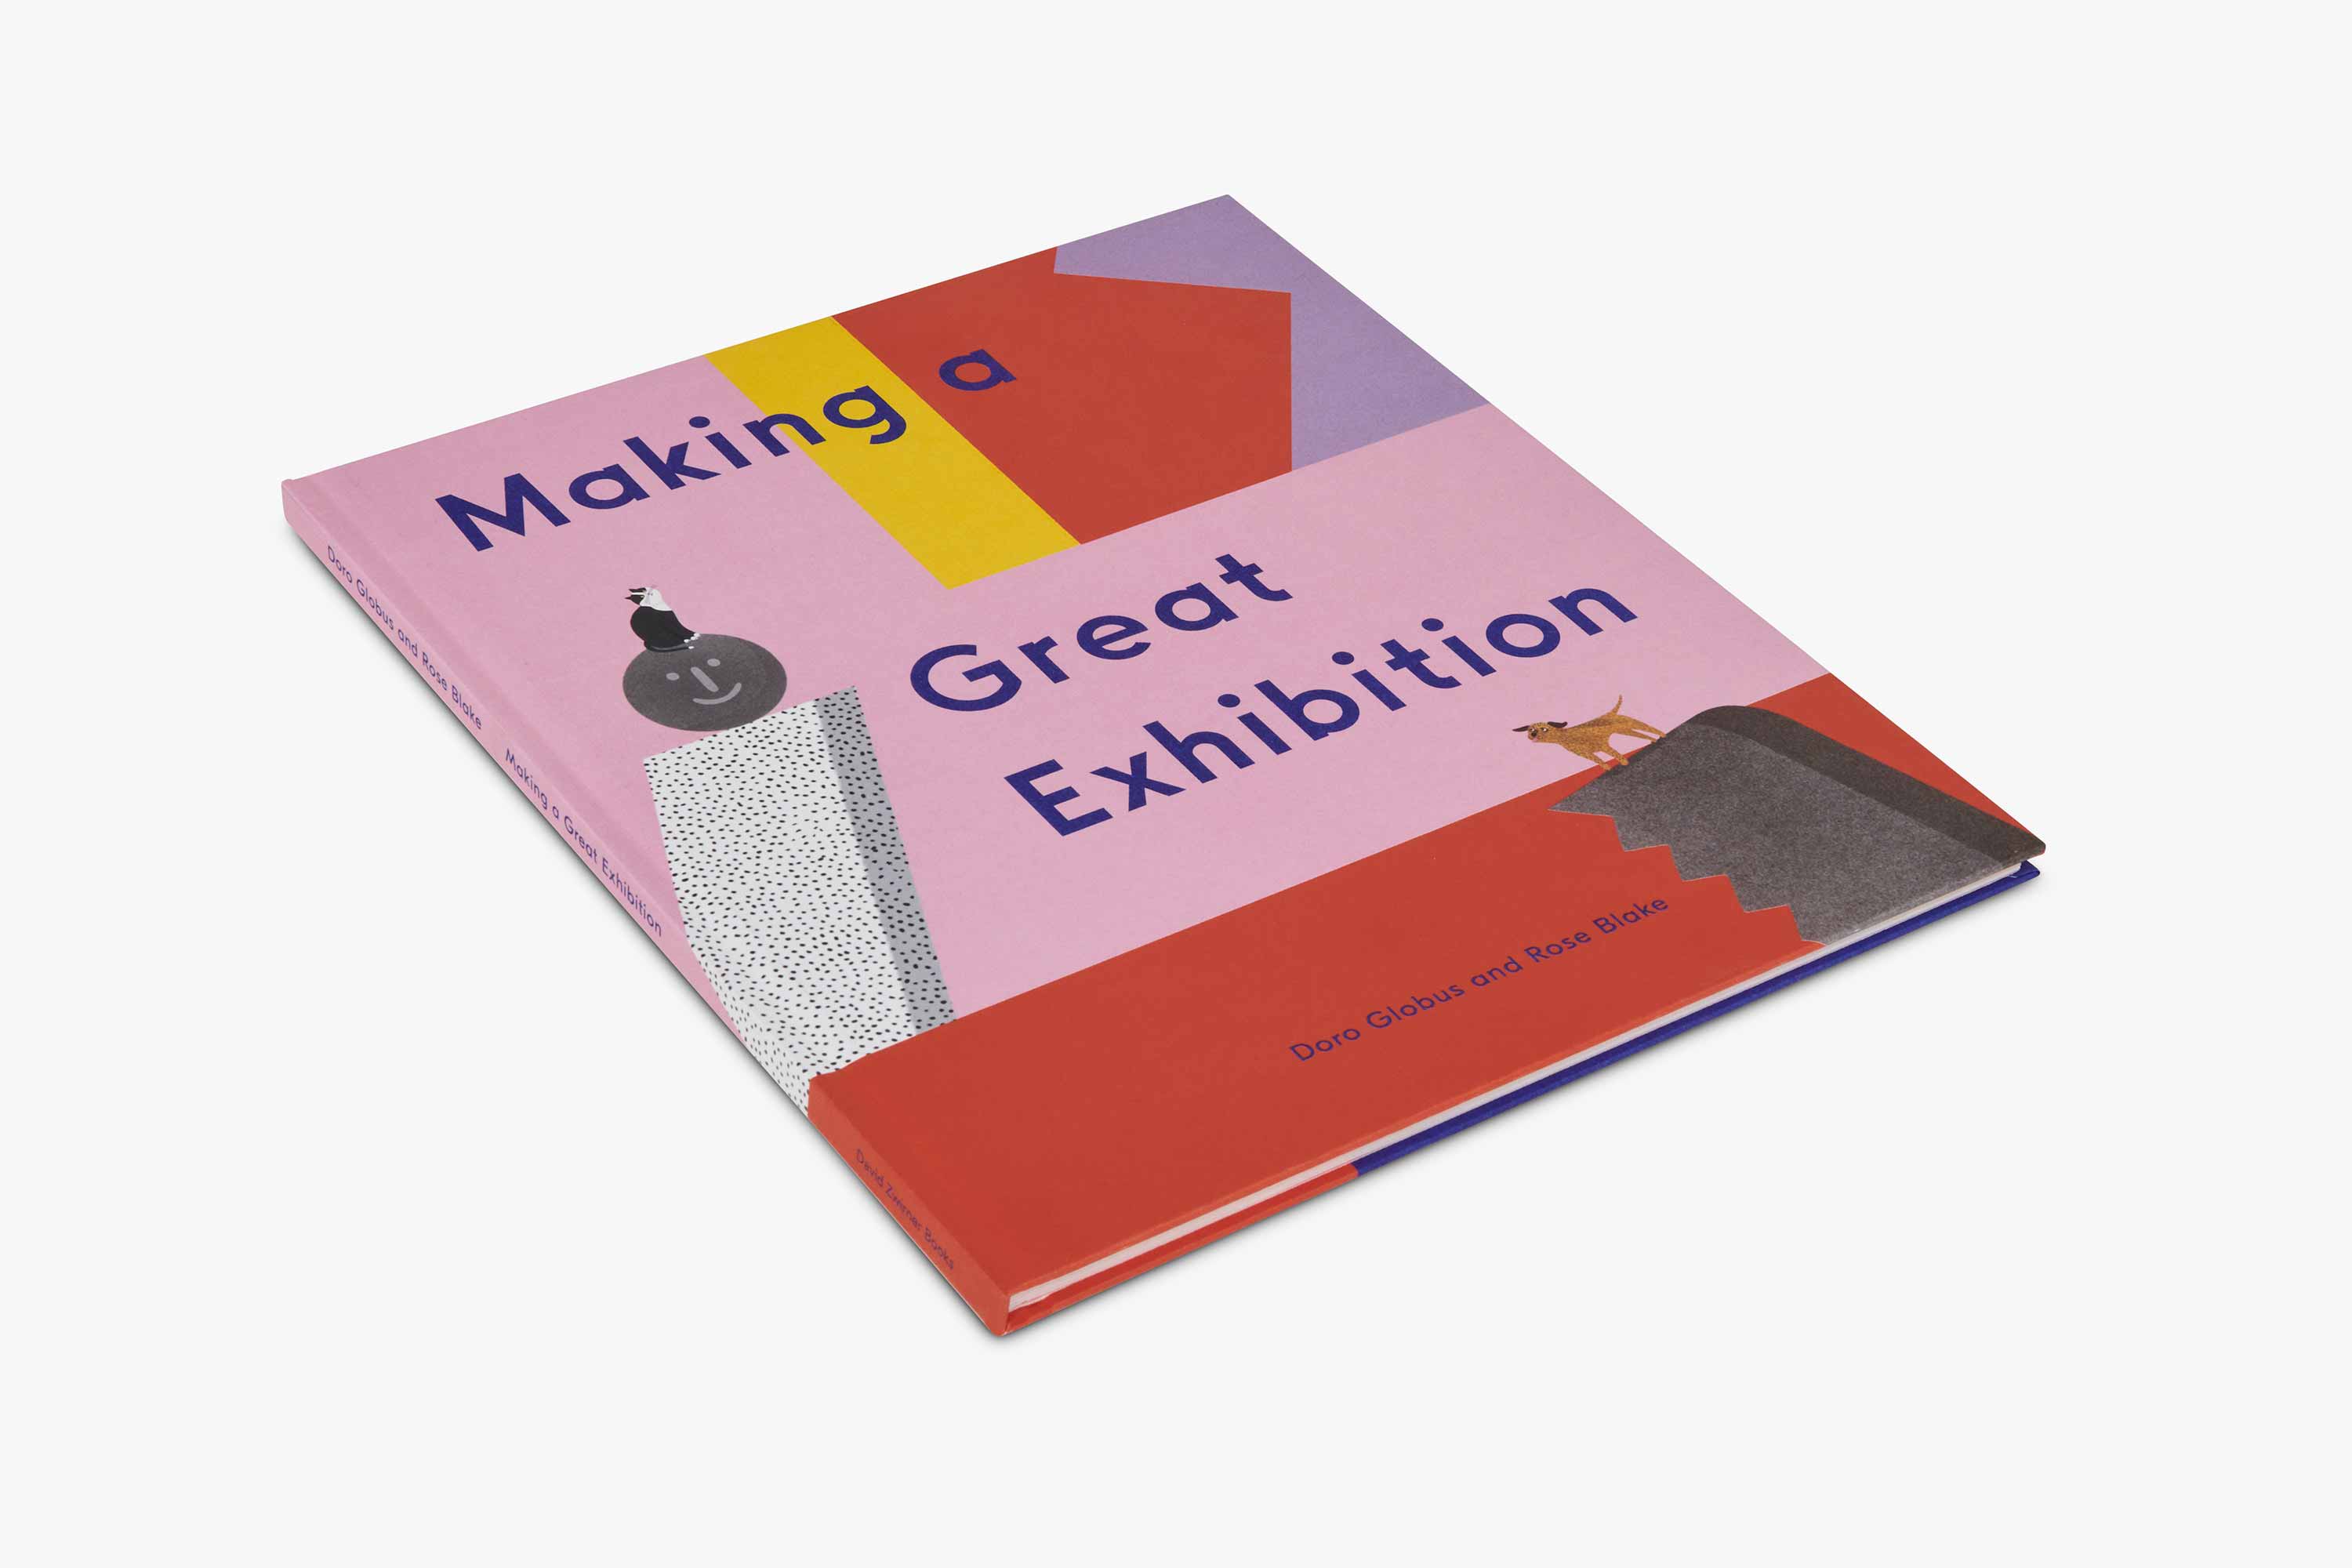 Making a Great Exhibition (Books for Kids, Art for Kids, Art Book) [Book]